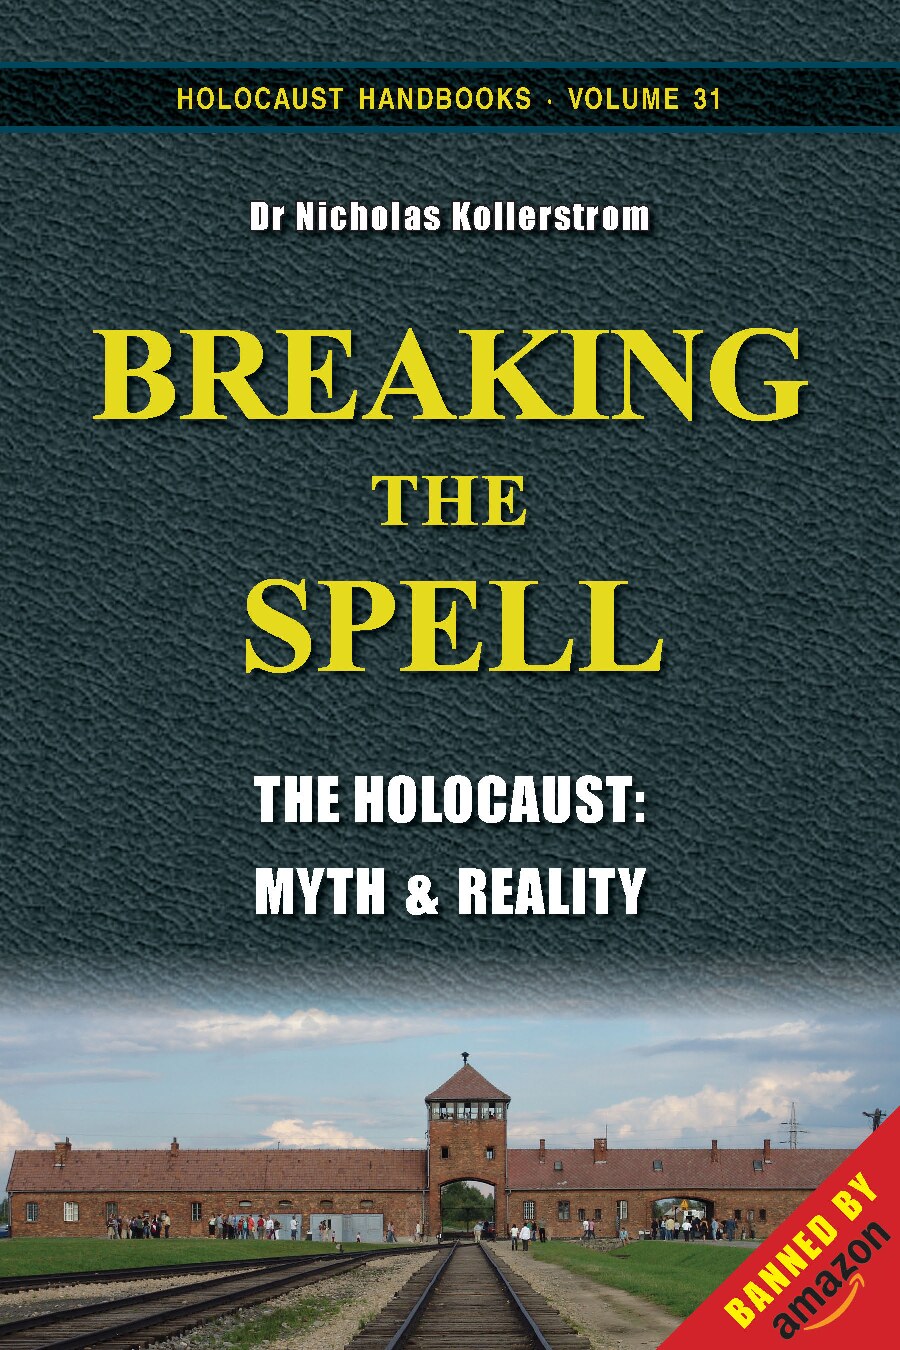 Breaking the Spell: The Holocaust - Myth & Reality